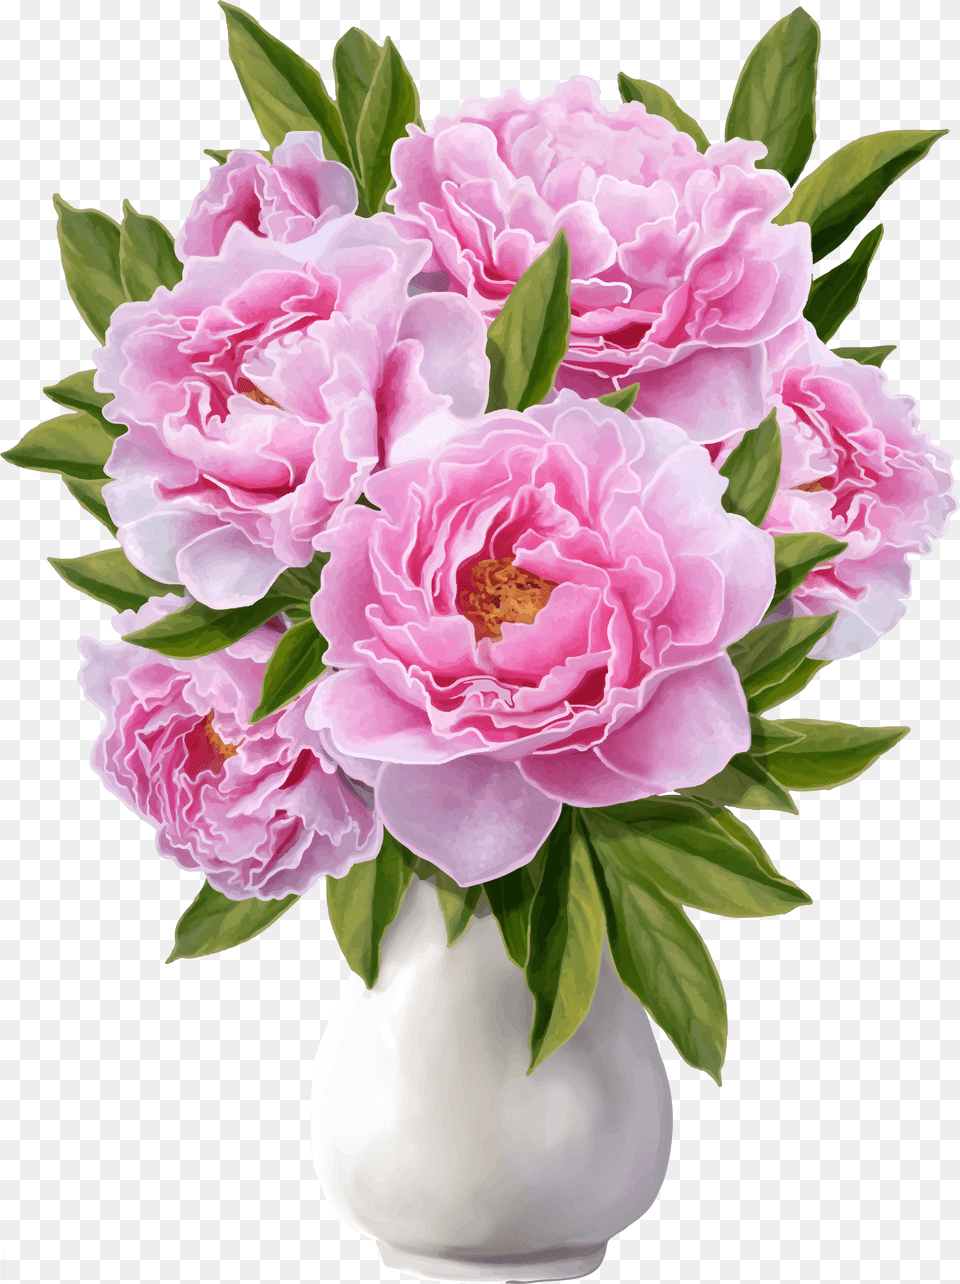 Of Peonies Banner Transparent Stock Vase With Flowers Transparent, Flower, Flower Arrangement, Flower Bouquet, Plant Png Image